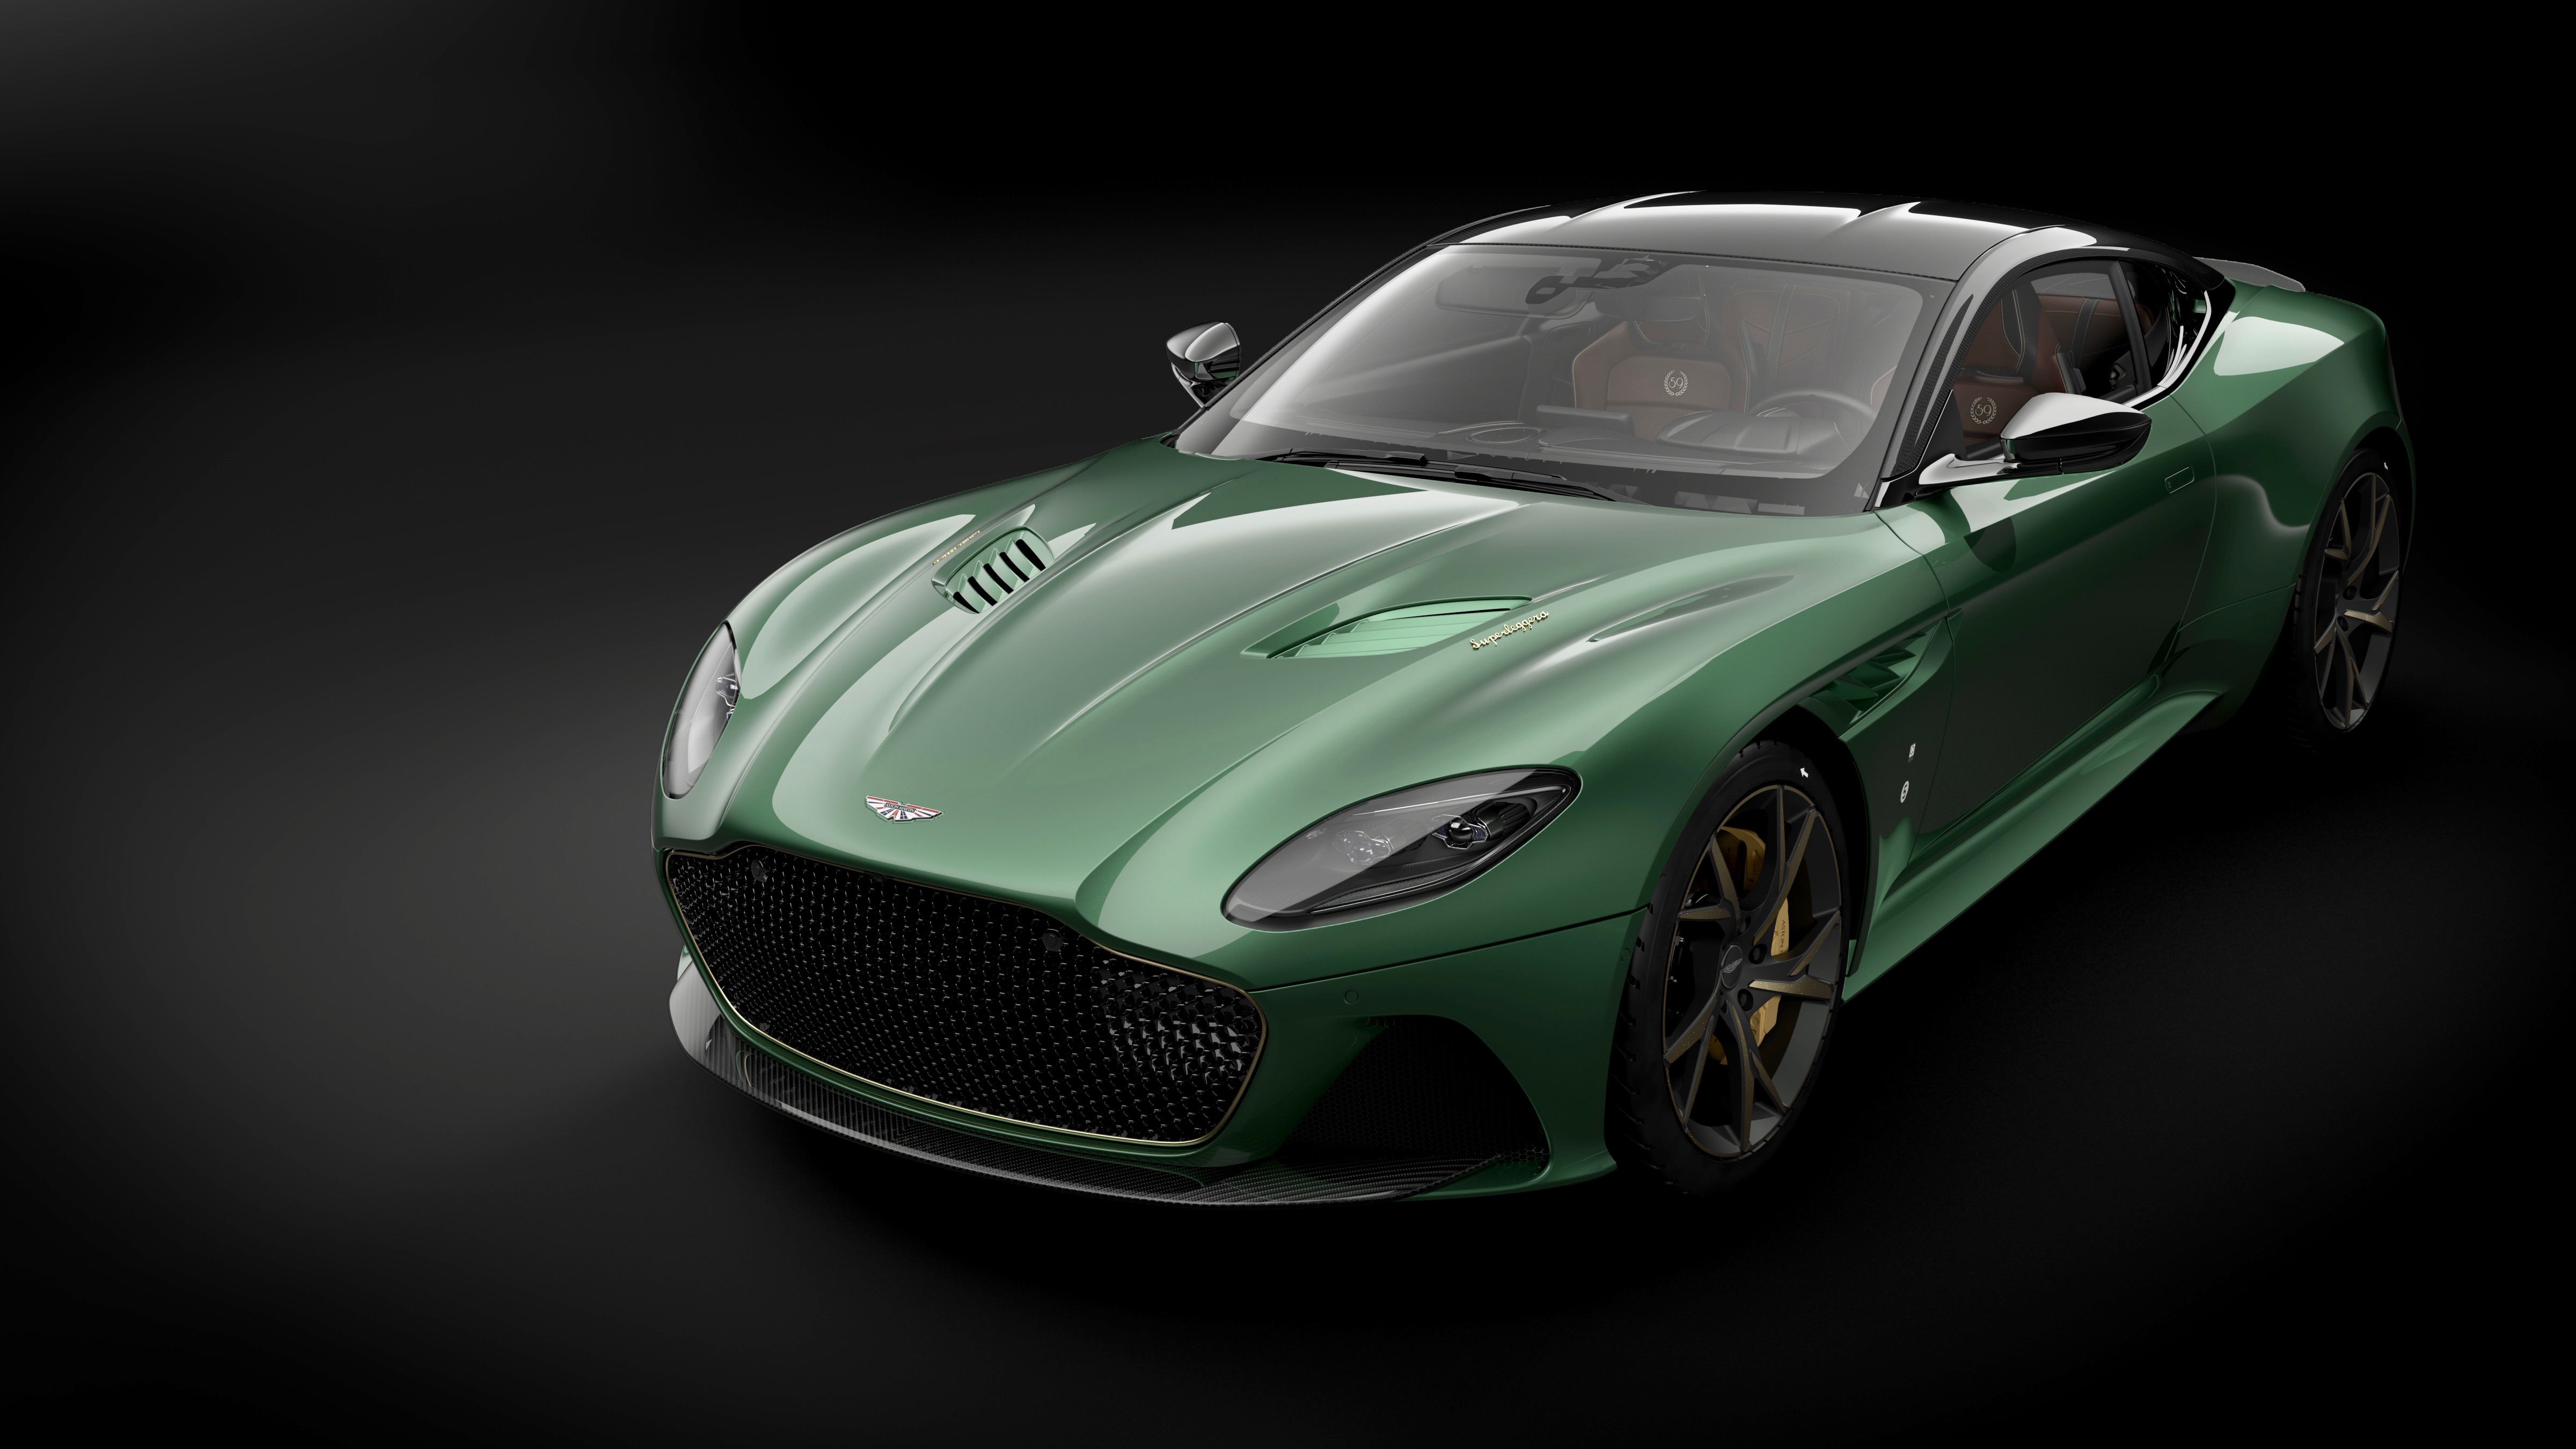 Aston Martin celebrates 1959 Le Mans victory with 24 special 